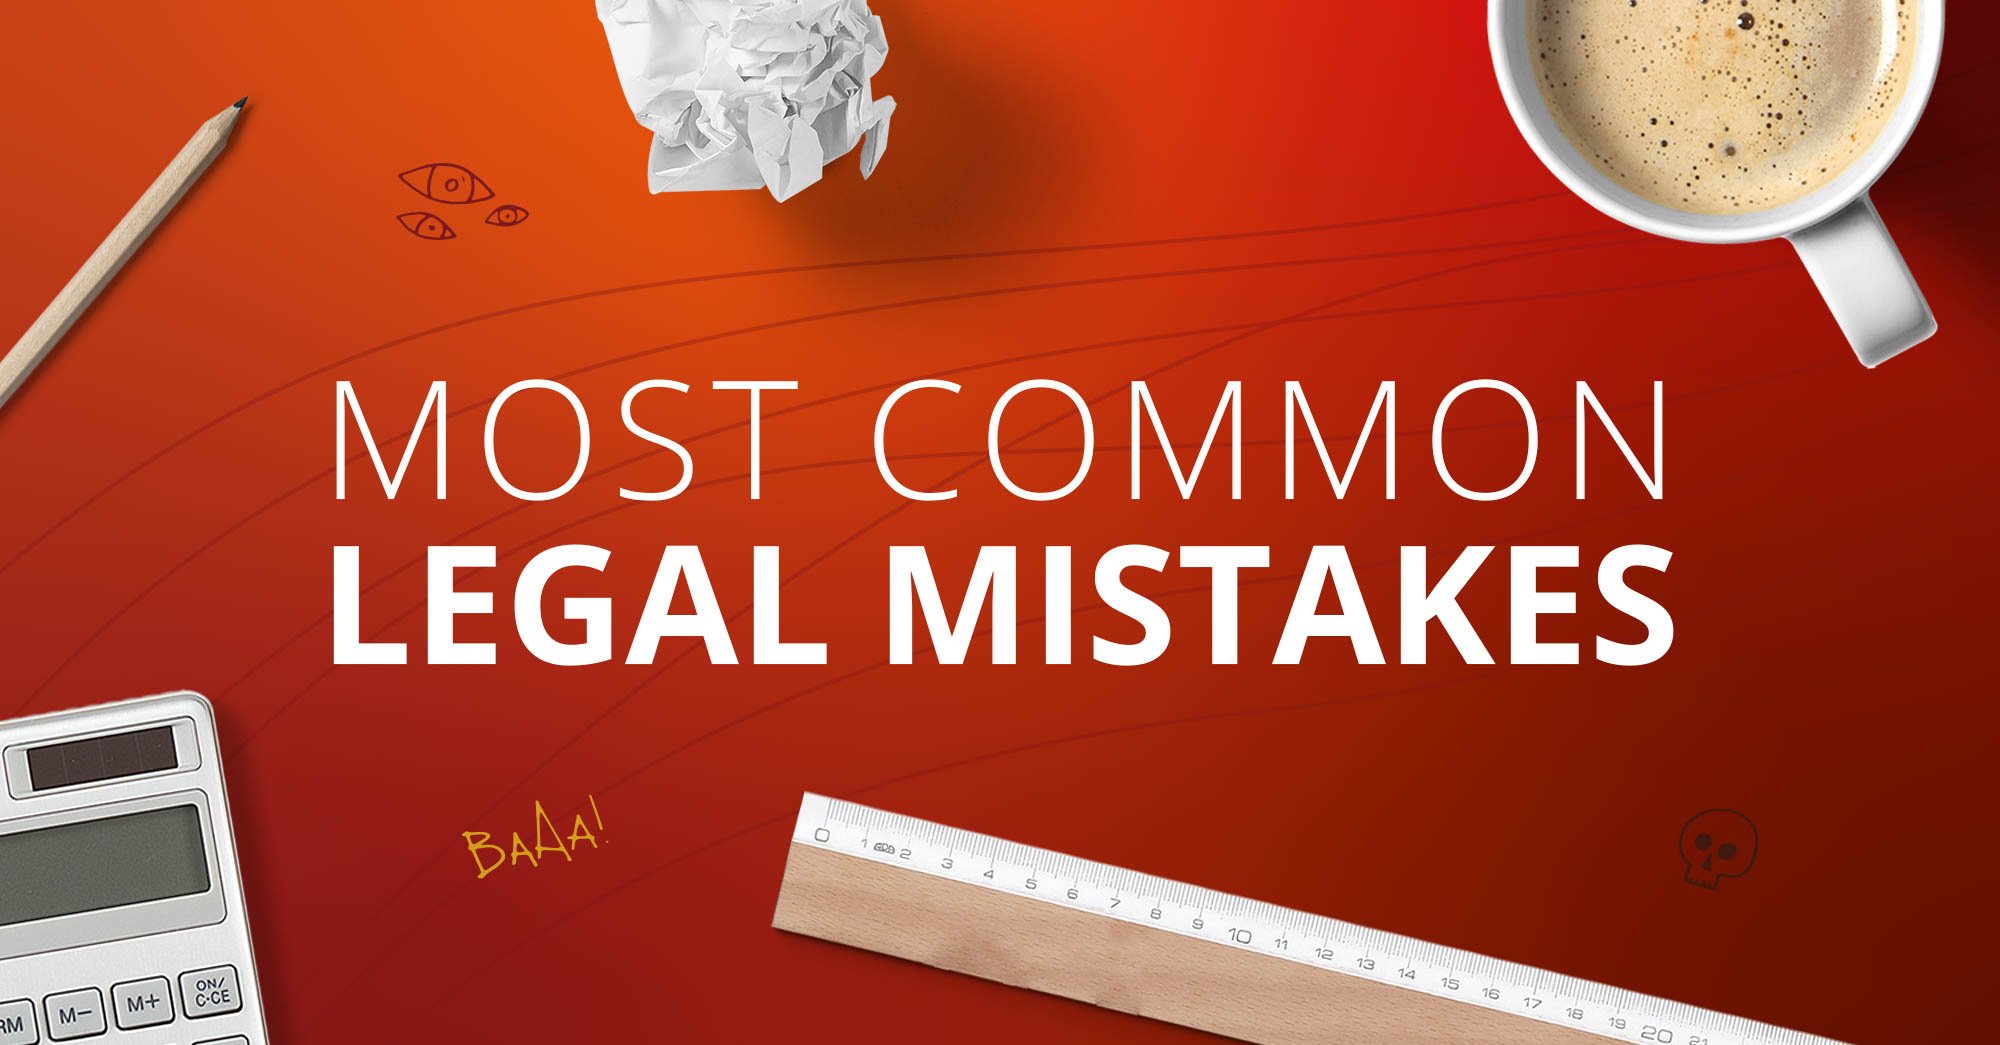 The biggest legal mistakes startups make and how you can avoid them